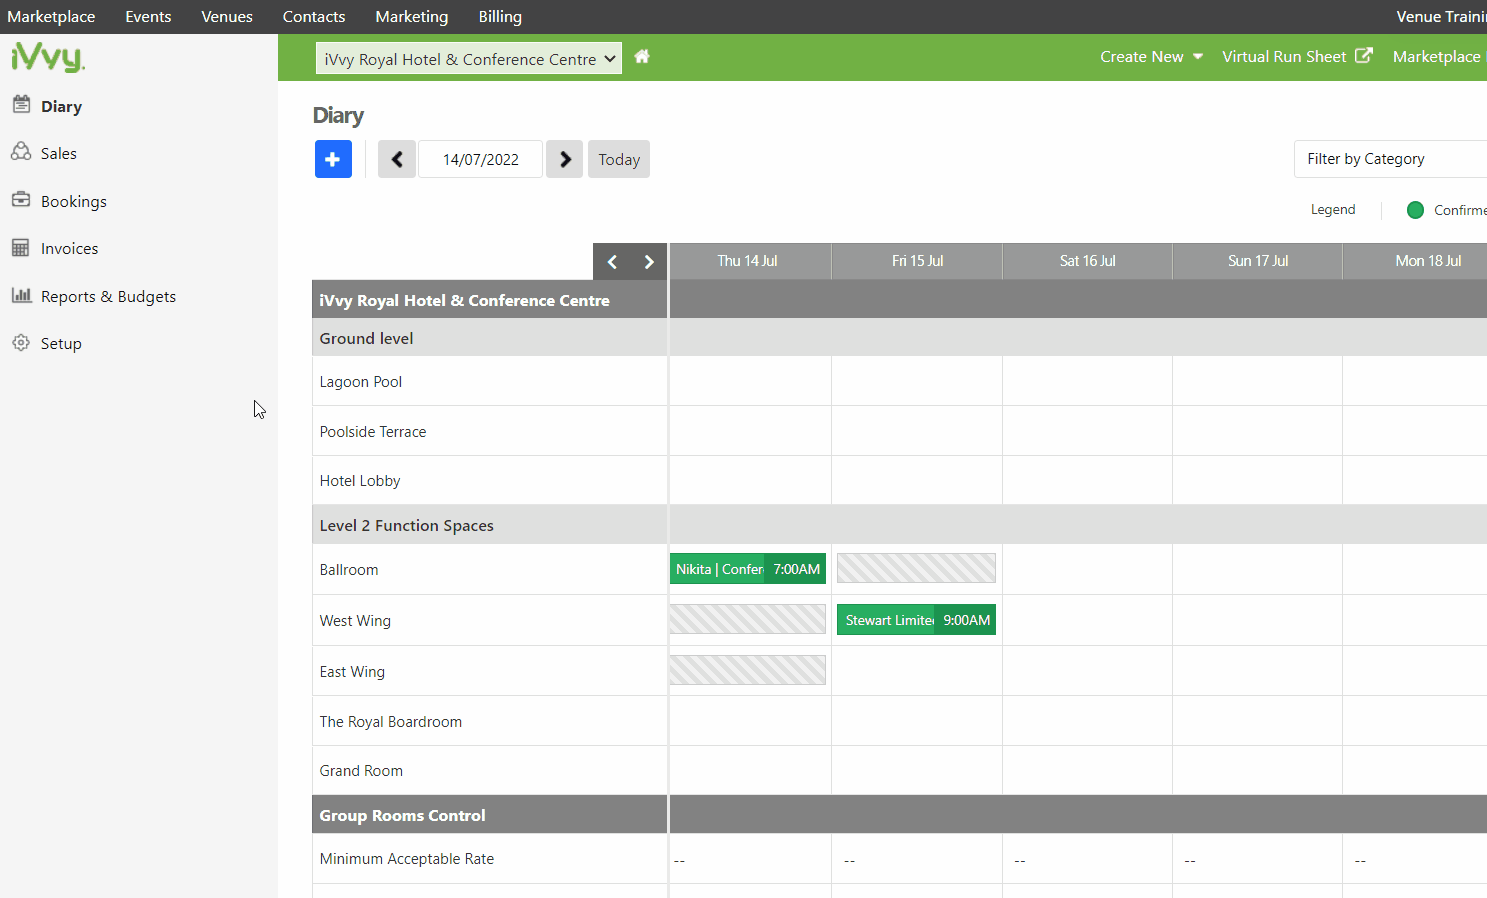 Adding a default note to a booking